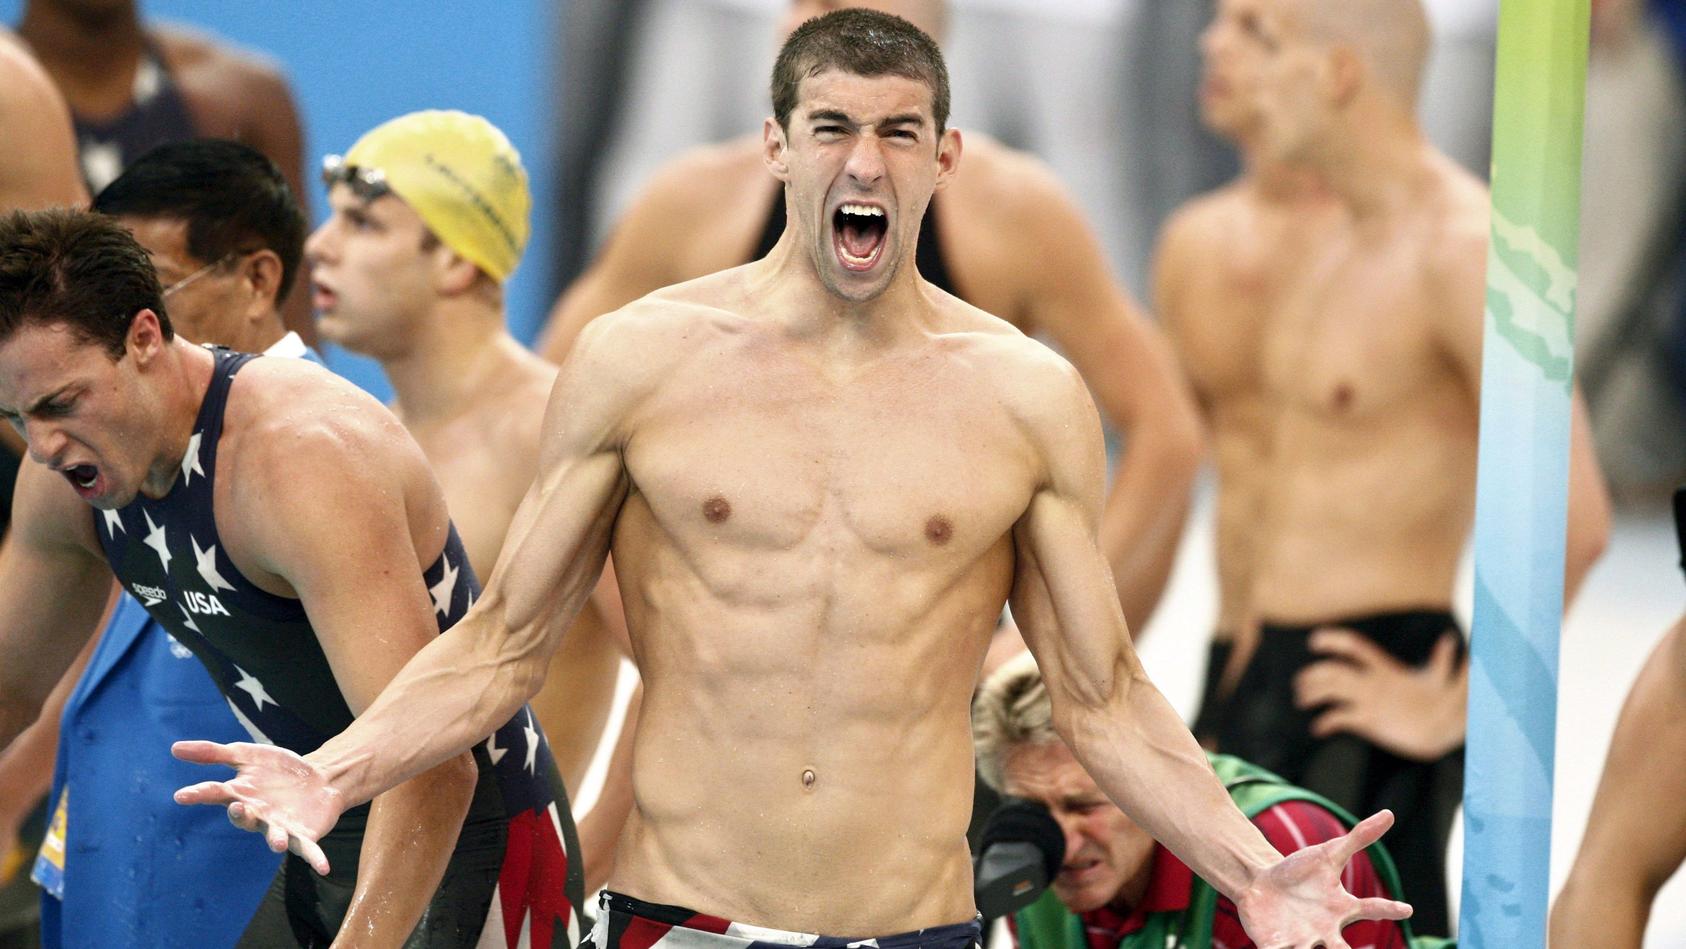 Michael fred phelps ii (born june 30, 1985) is an american former competiti...